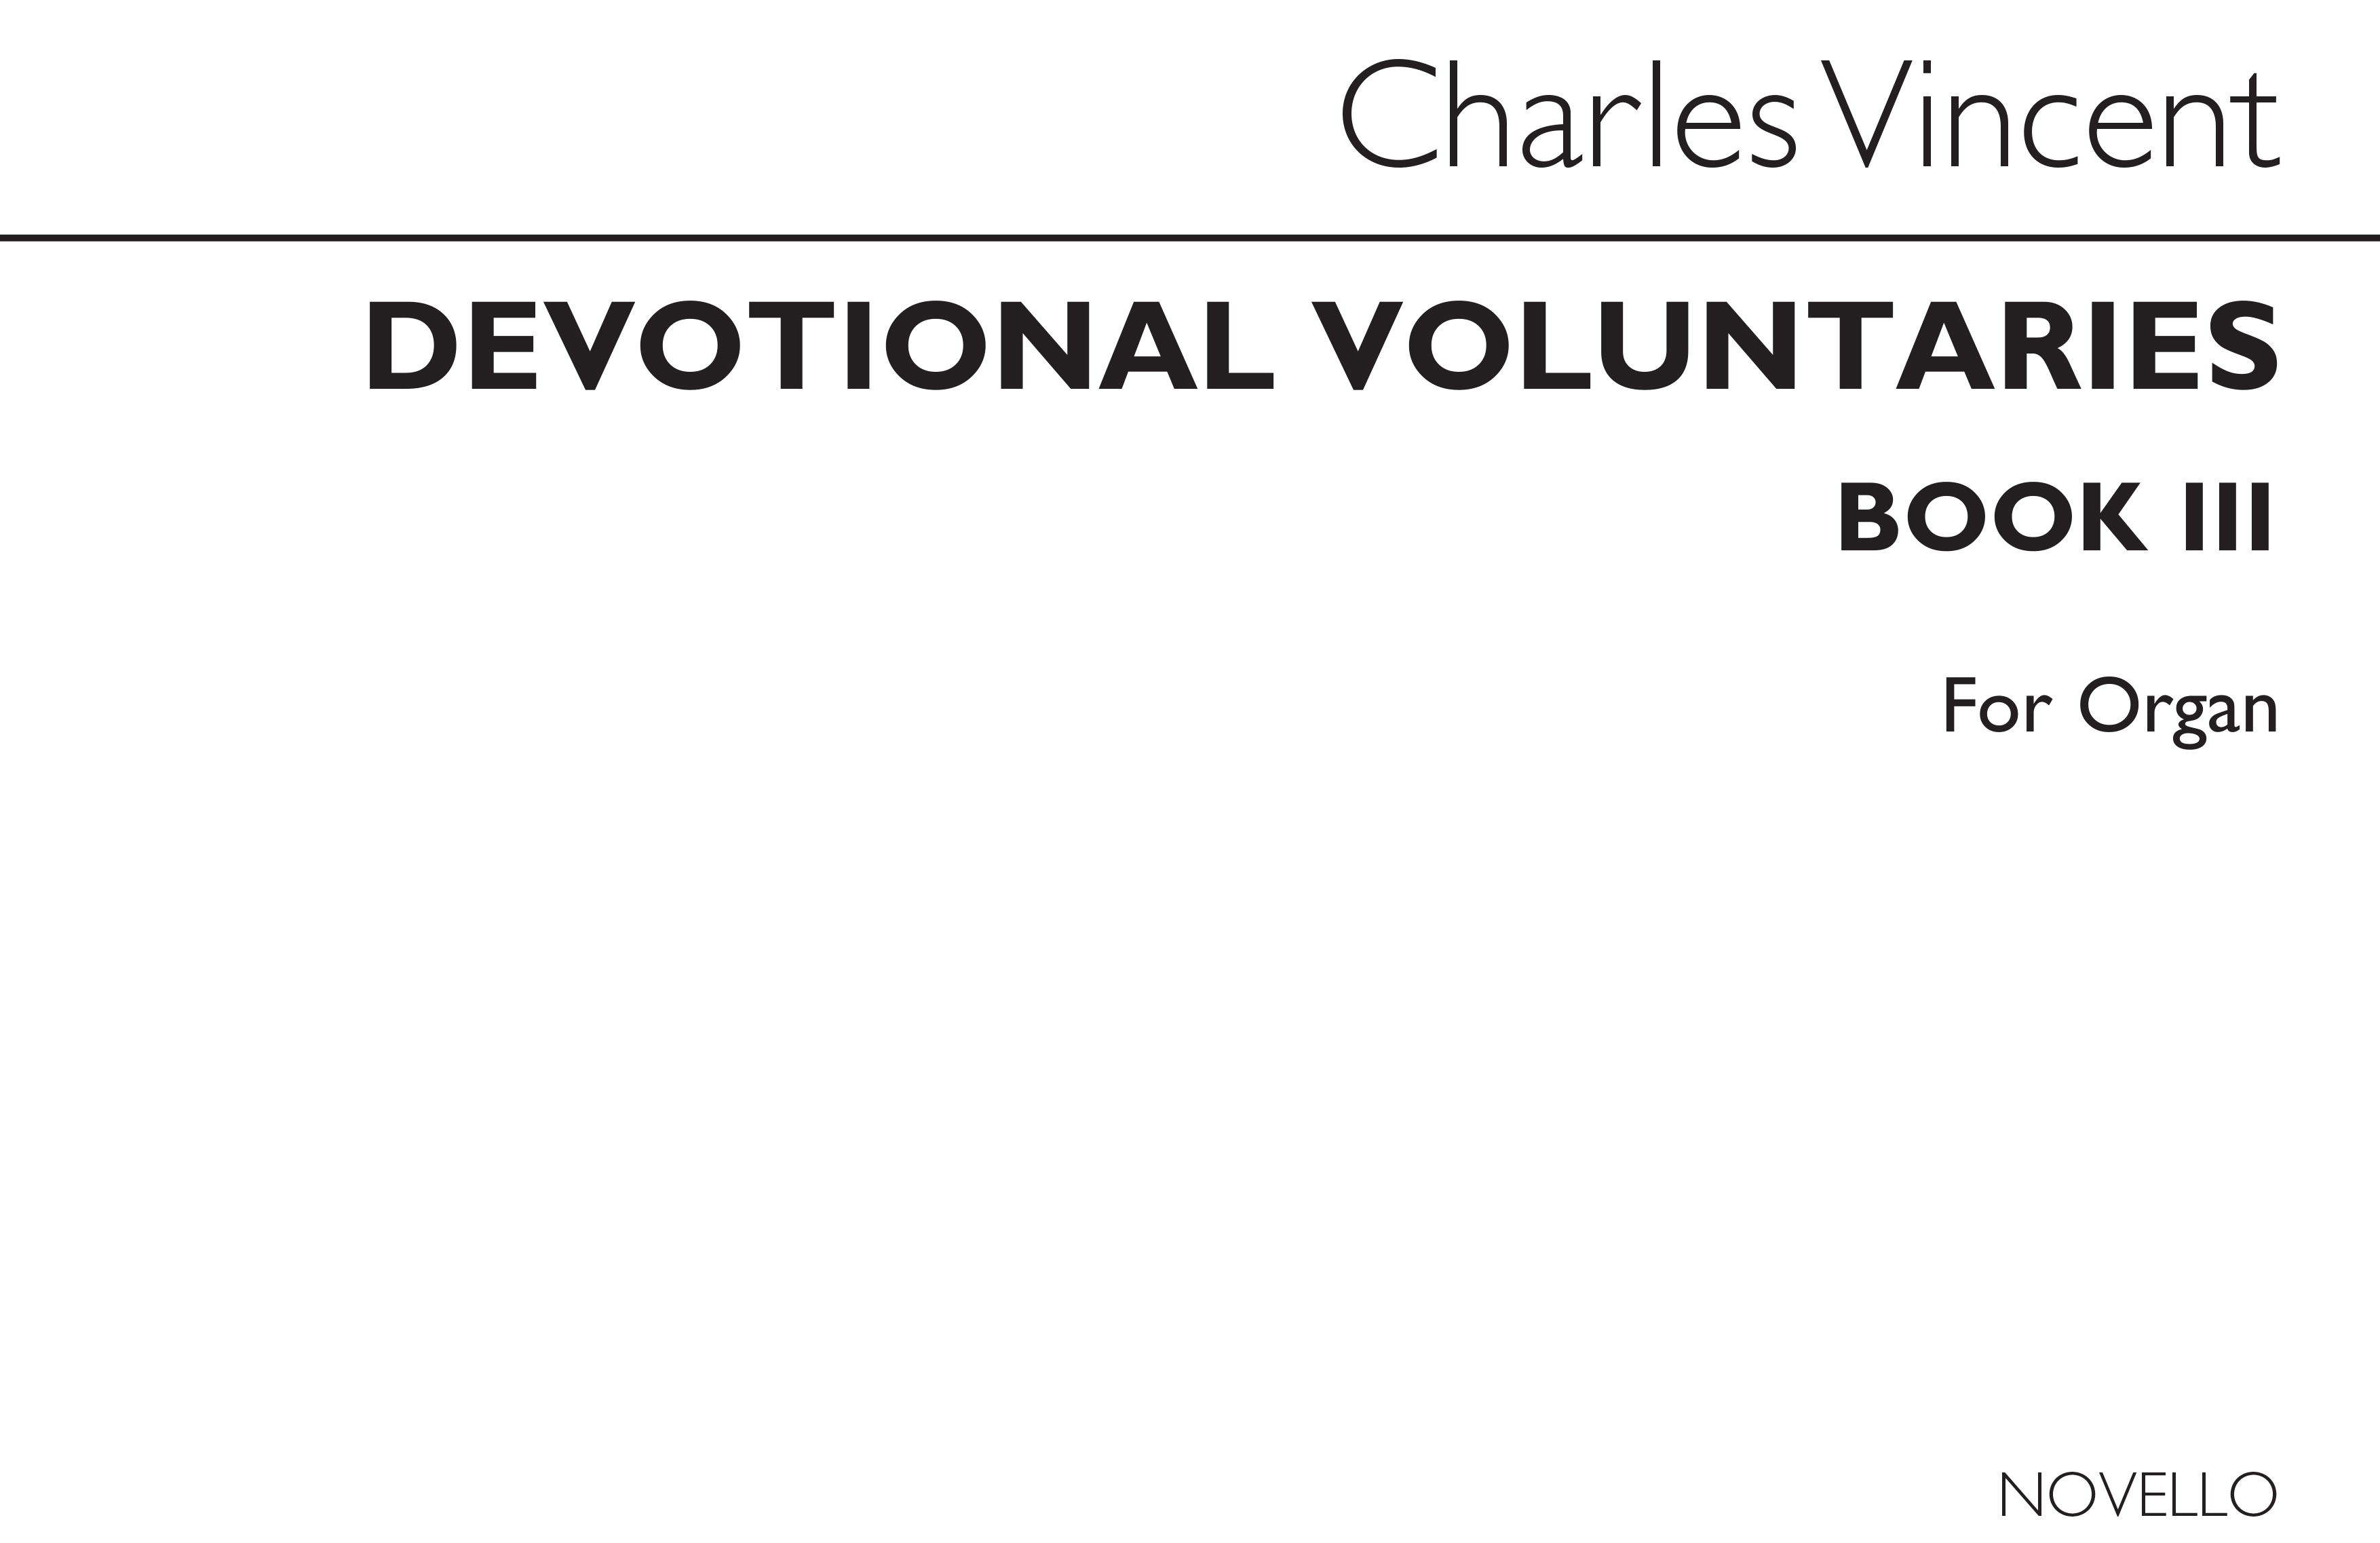 Vincent, C Devotional Voluntaries Book 3 For Organ (Three Stave)